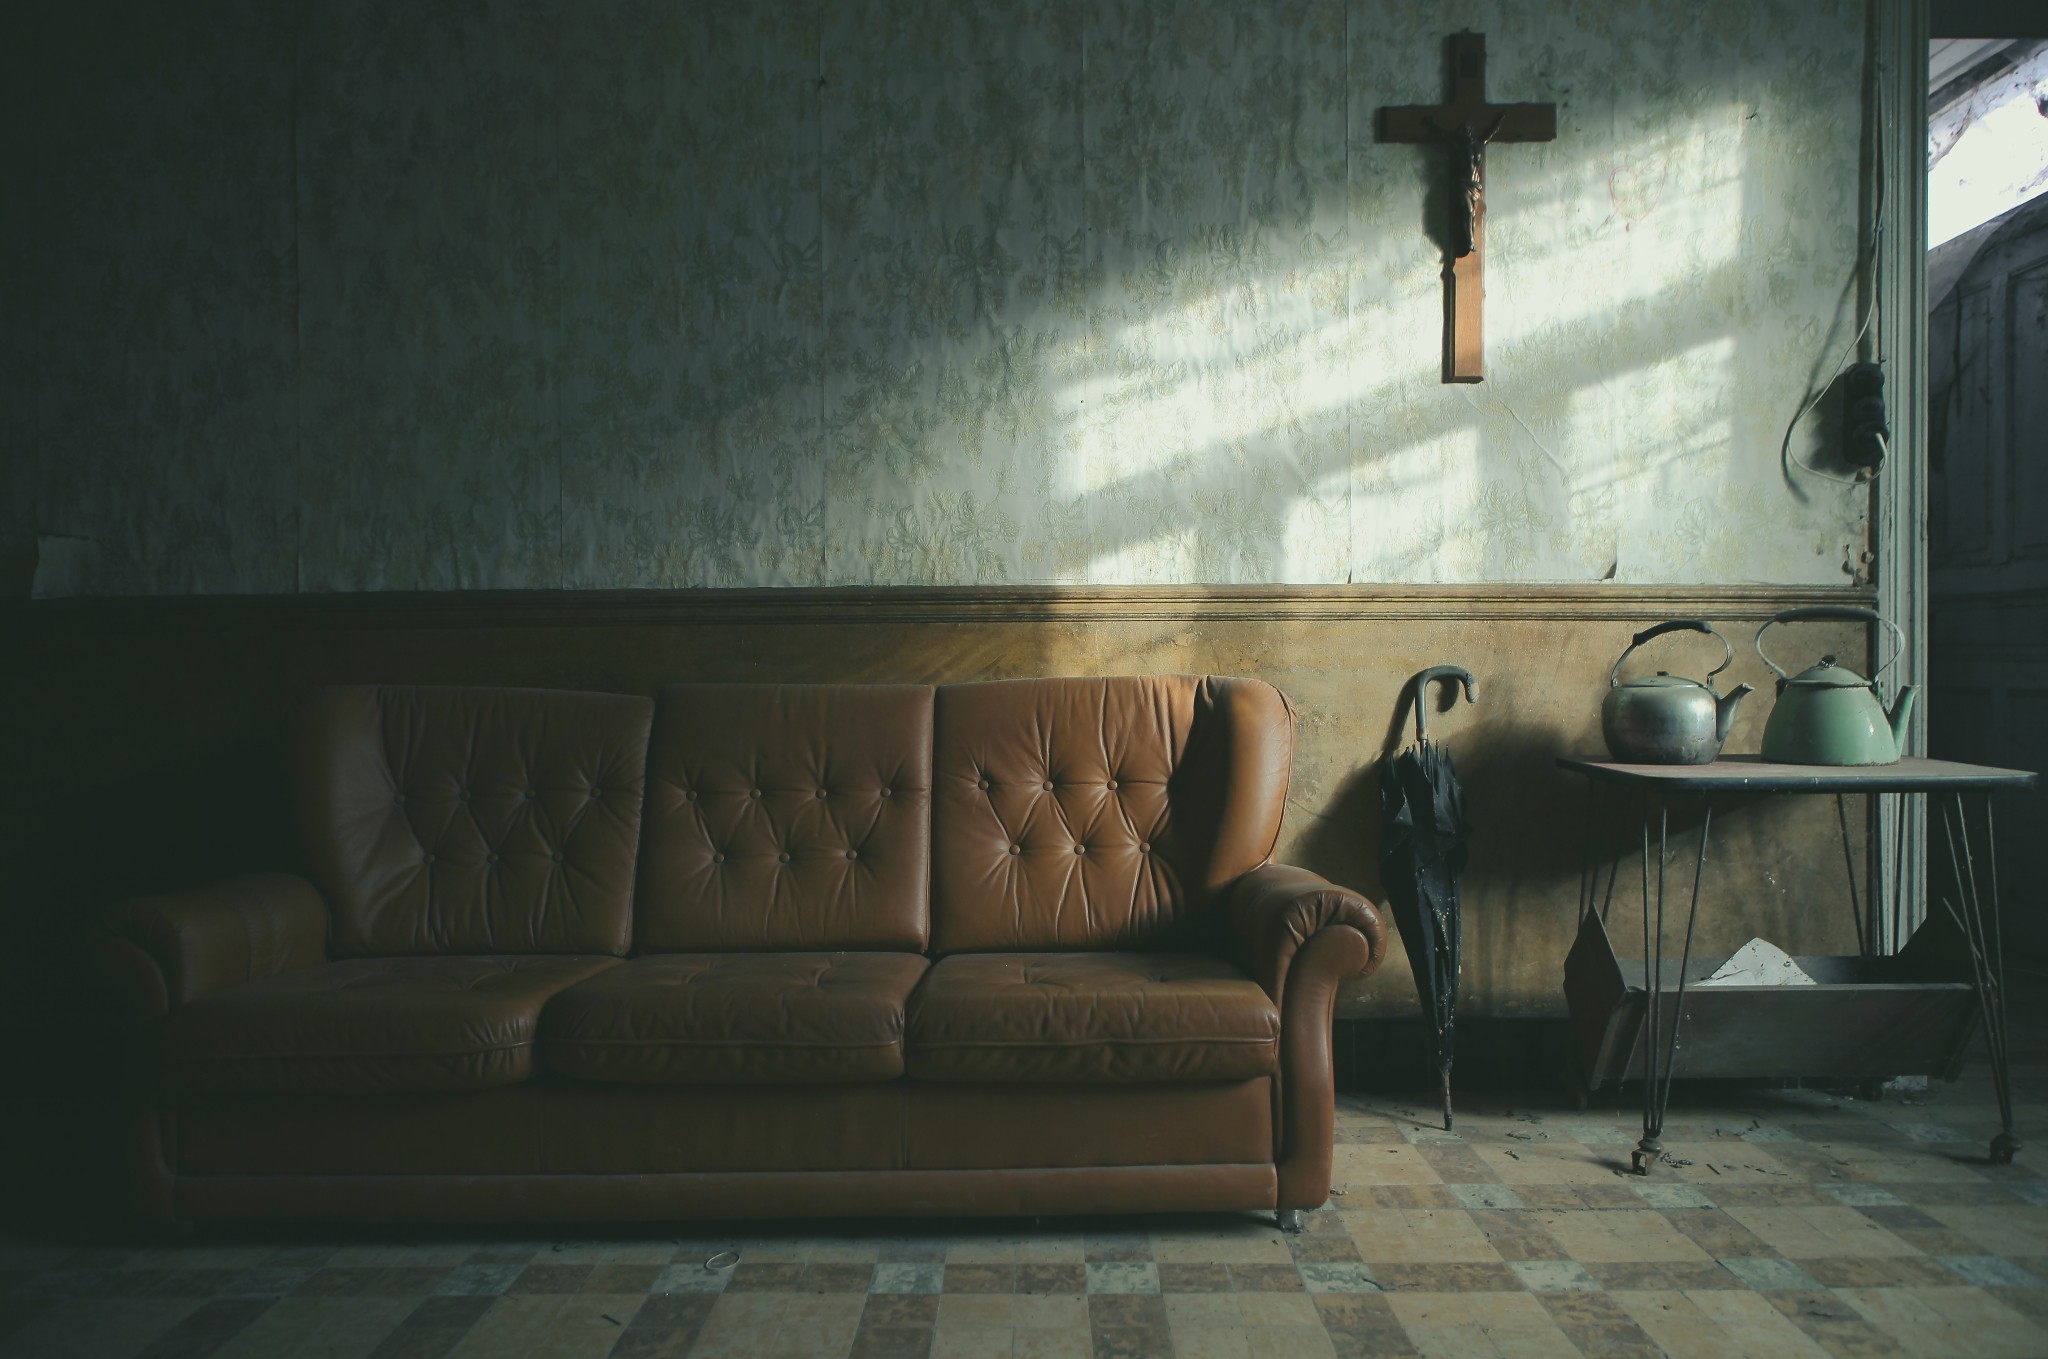 Interior Photography Abandoned Couch Cross Jesus Christ Wall Umbrella Kettle Sunlight Shadow 2048x1359